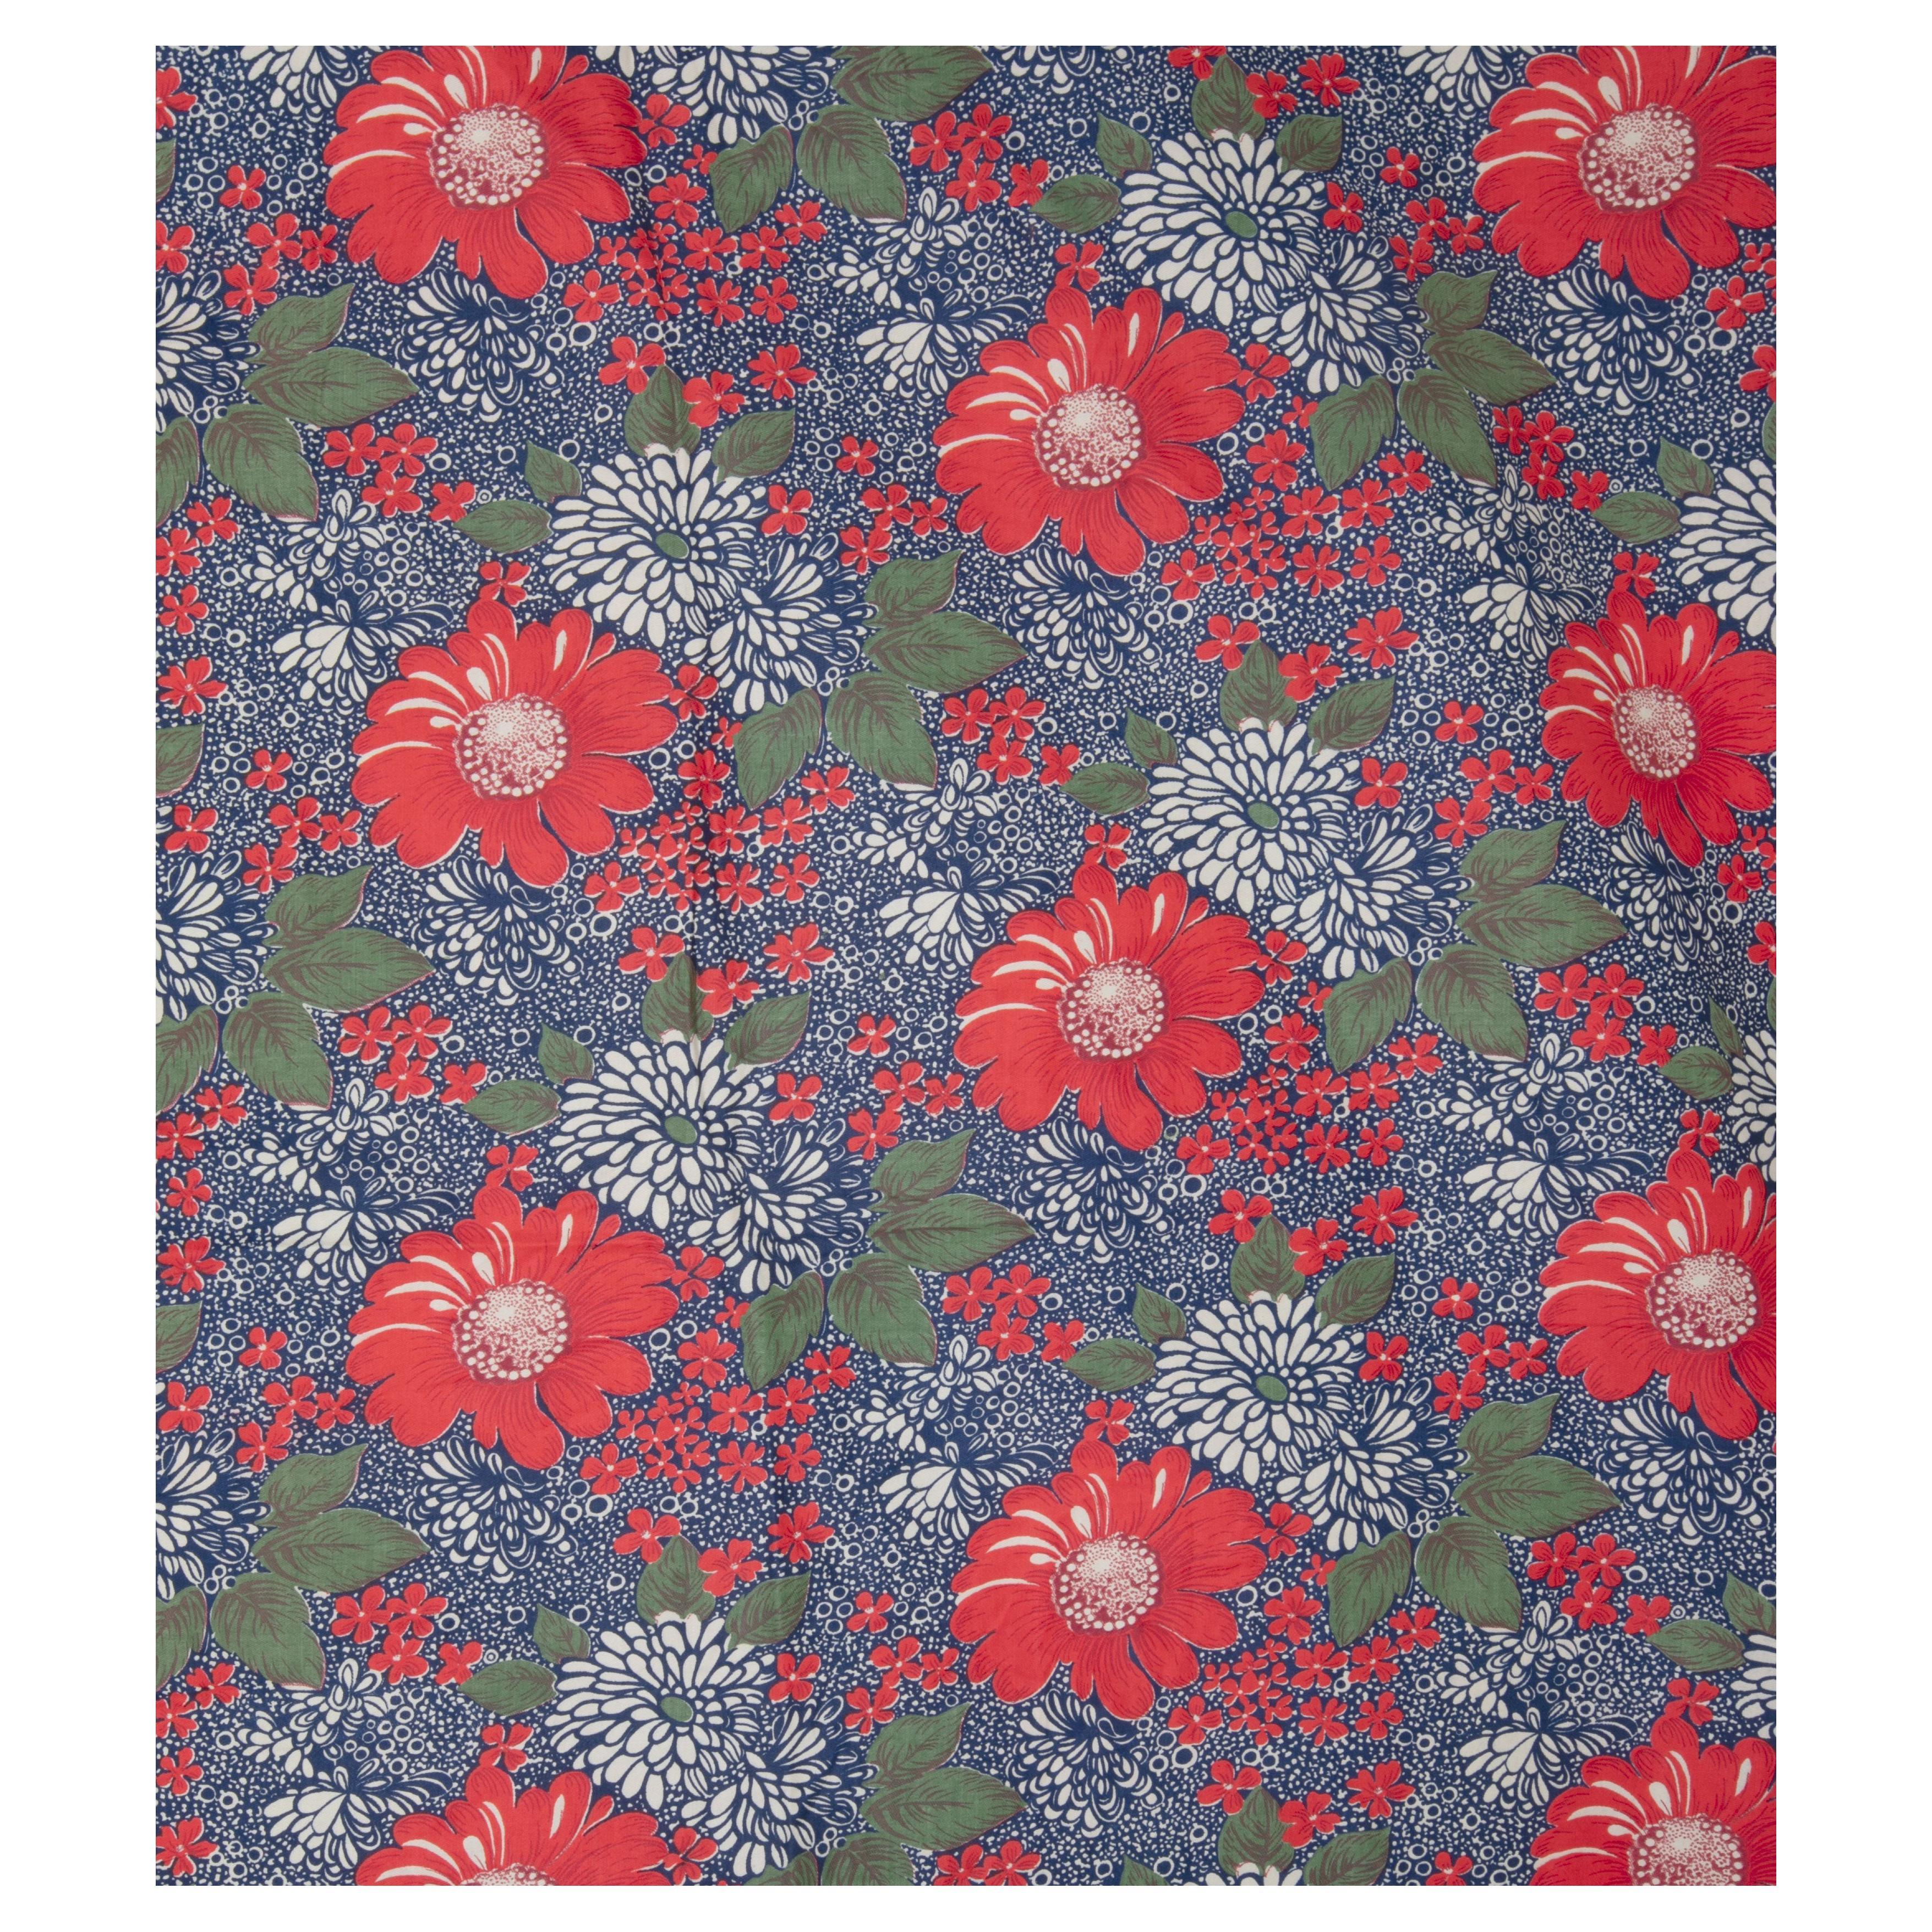 Russian Roller Printed Cotton Fabric Panel, Mid-20th Century or Earlier For Sale